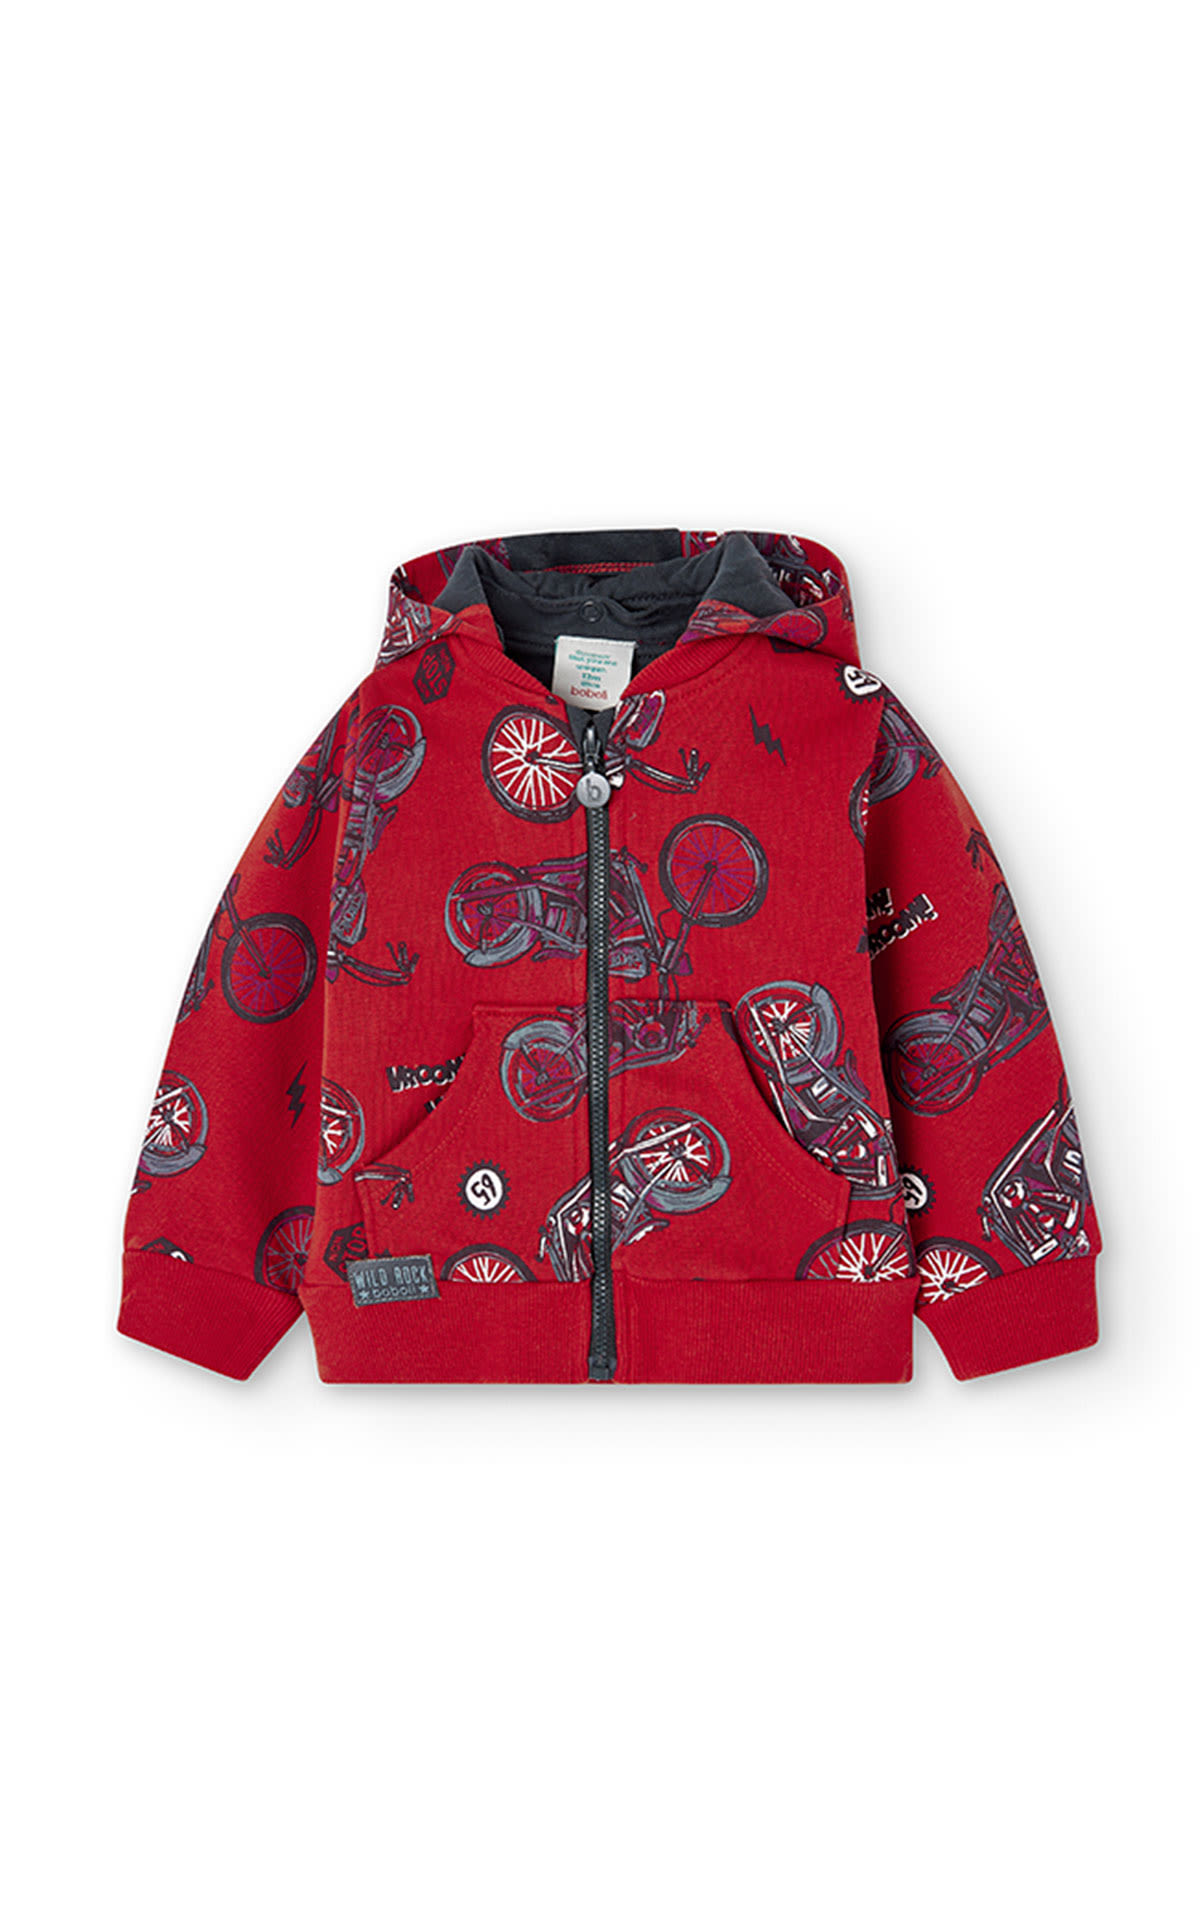 Red hooded sweater with motorcycle print boboli